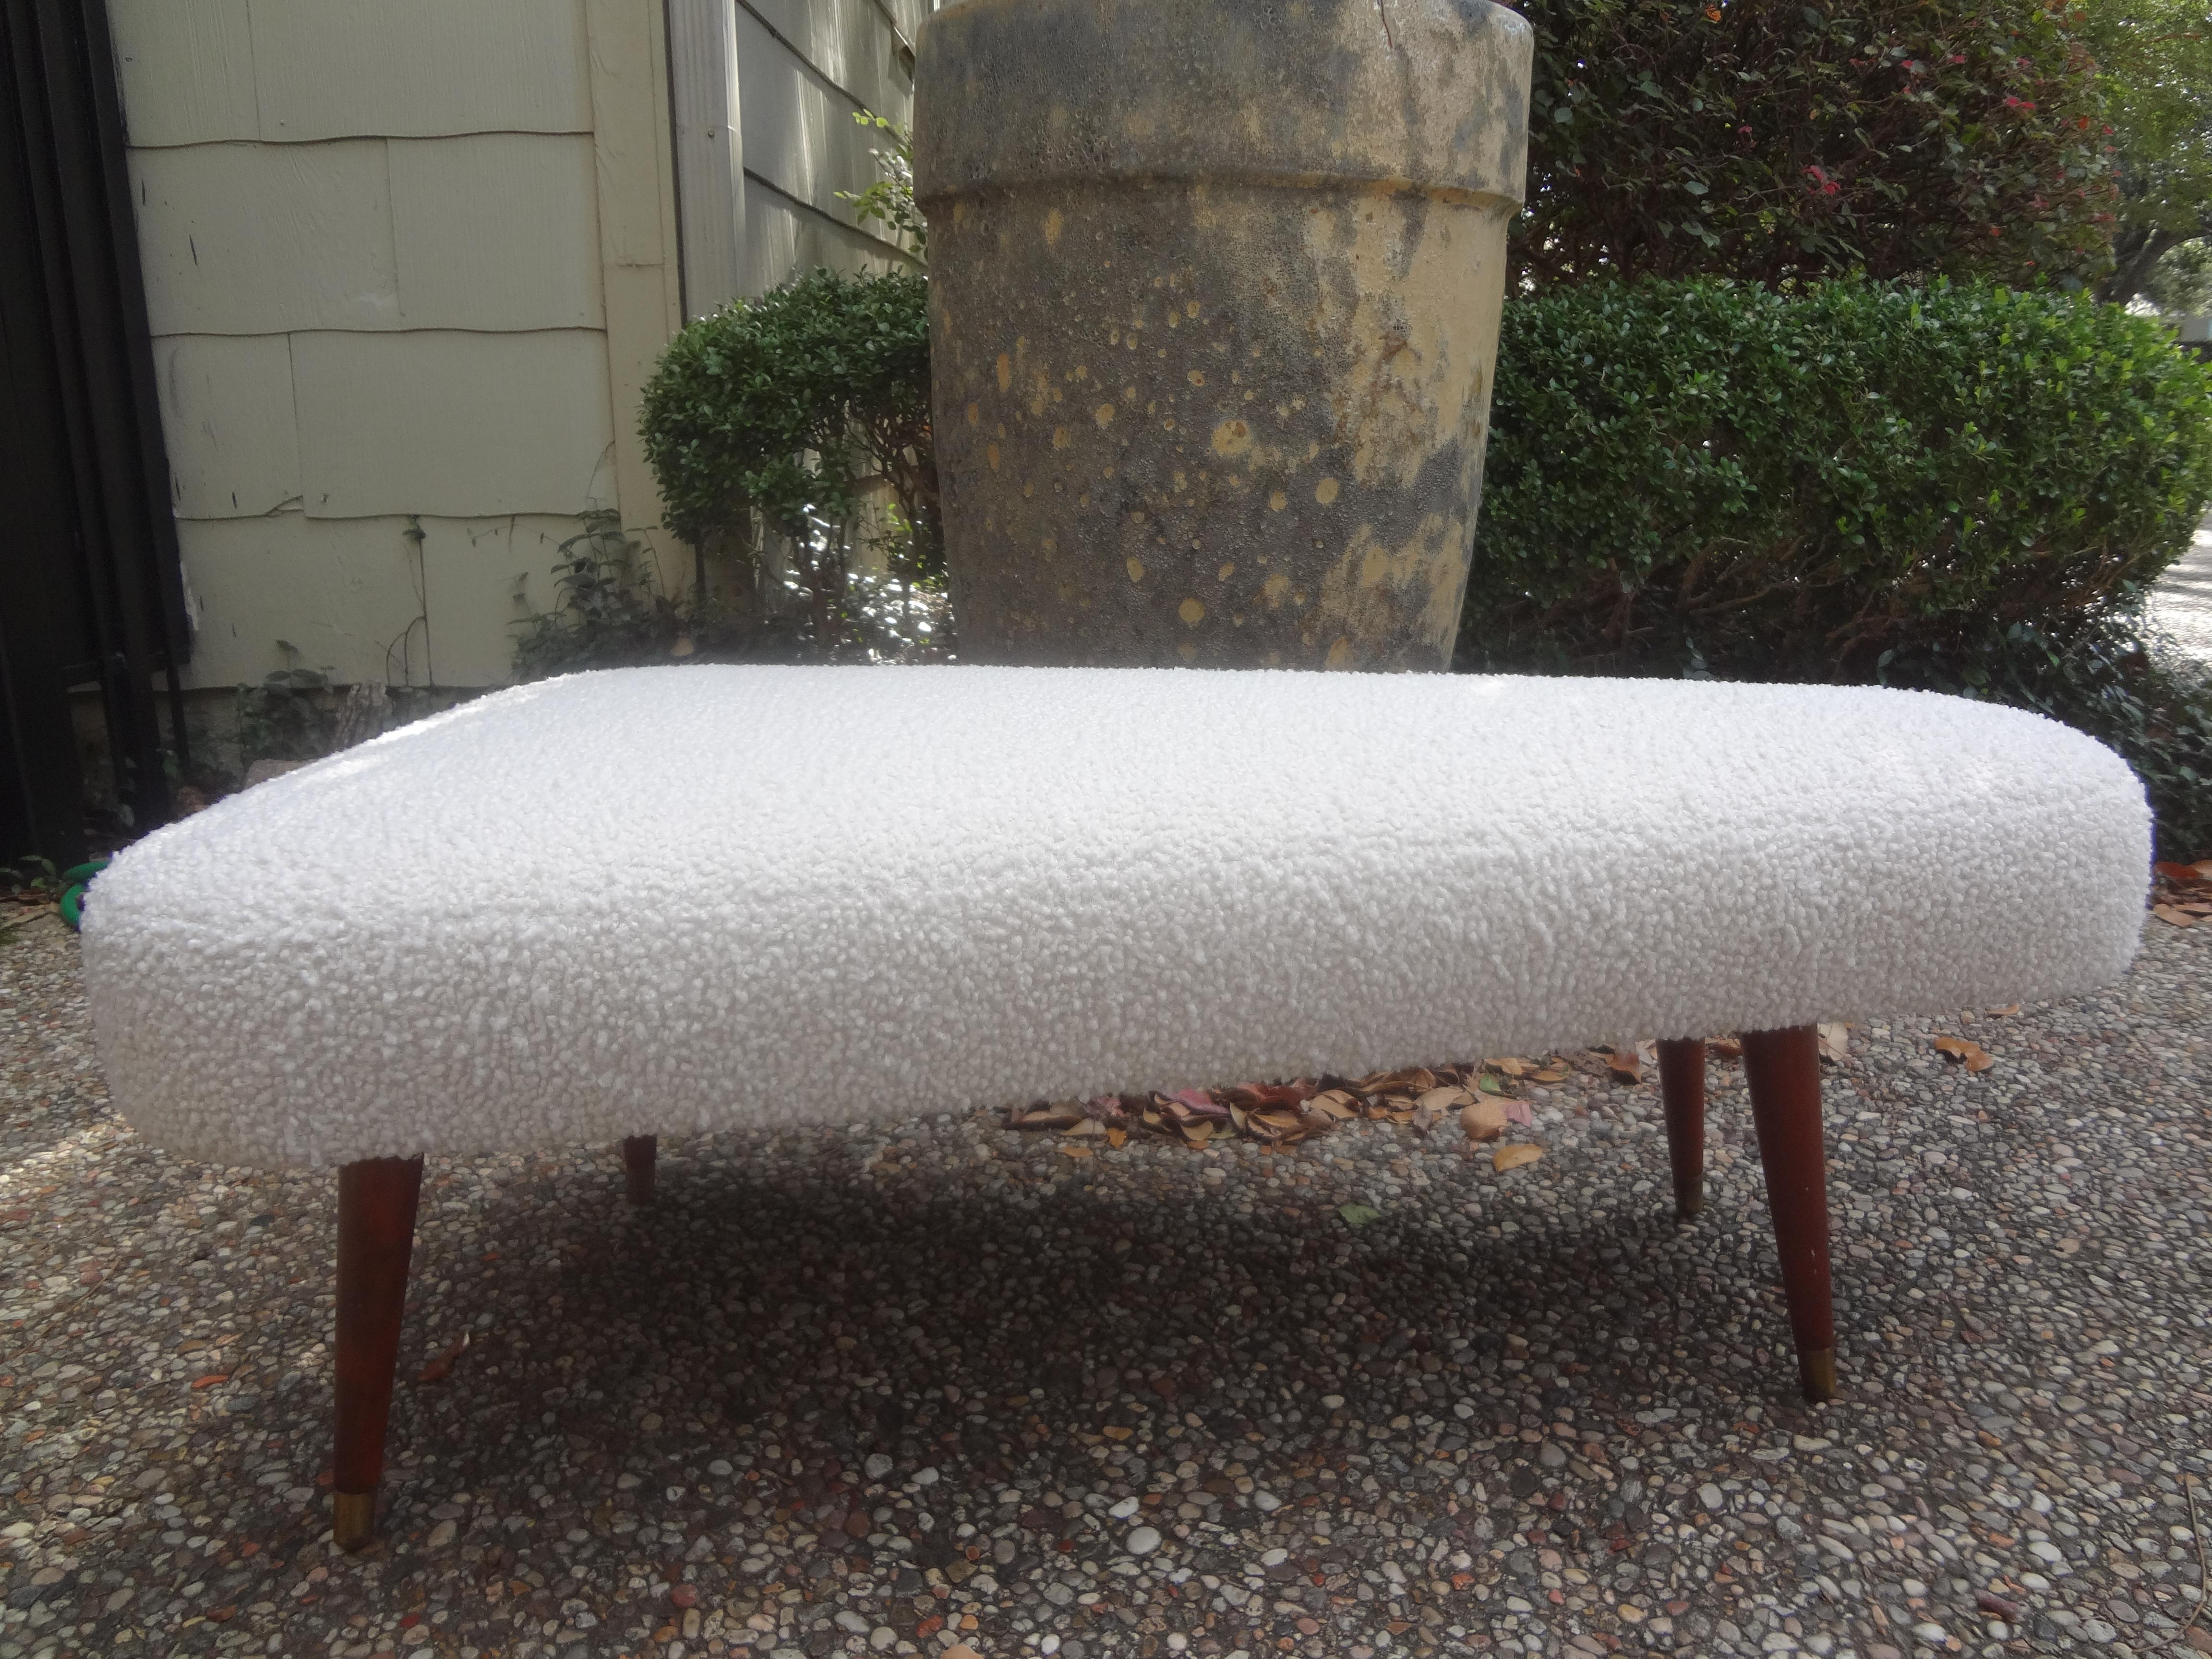 French Mid-Century Modern André Arbus style triangular bench. This unusual bench, ottoman or poof has graceful tapered legs with brass sabots and is newly upholstered in white boucle.